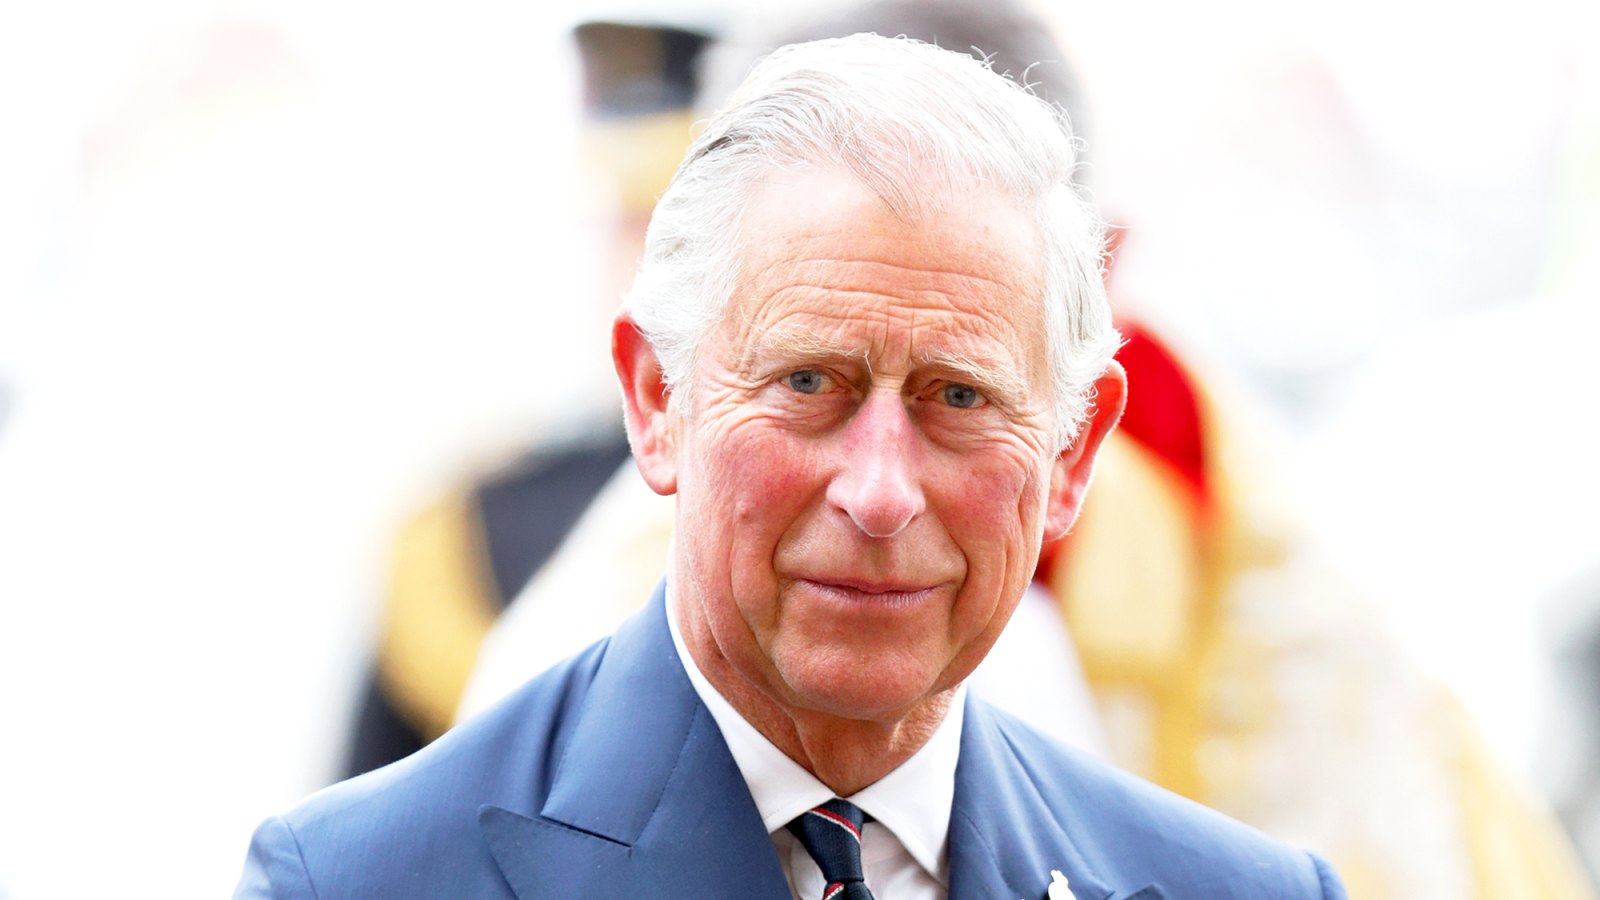 Prince Charles, Prince of Wales attends the 70th Anniversary of VE Day at Westminster Abbey in London, England.